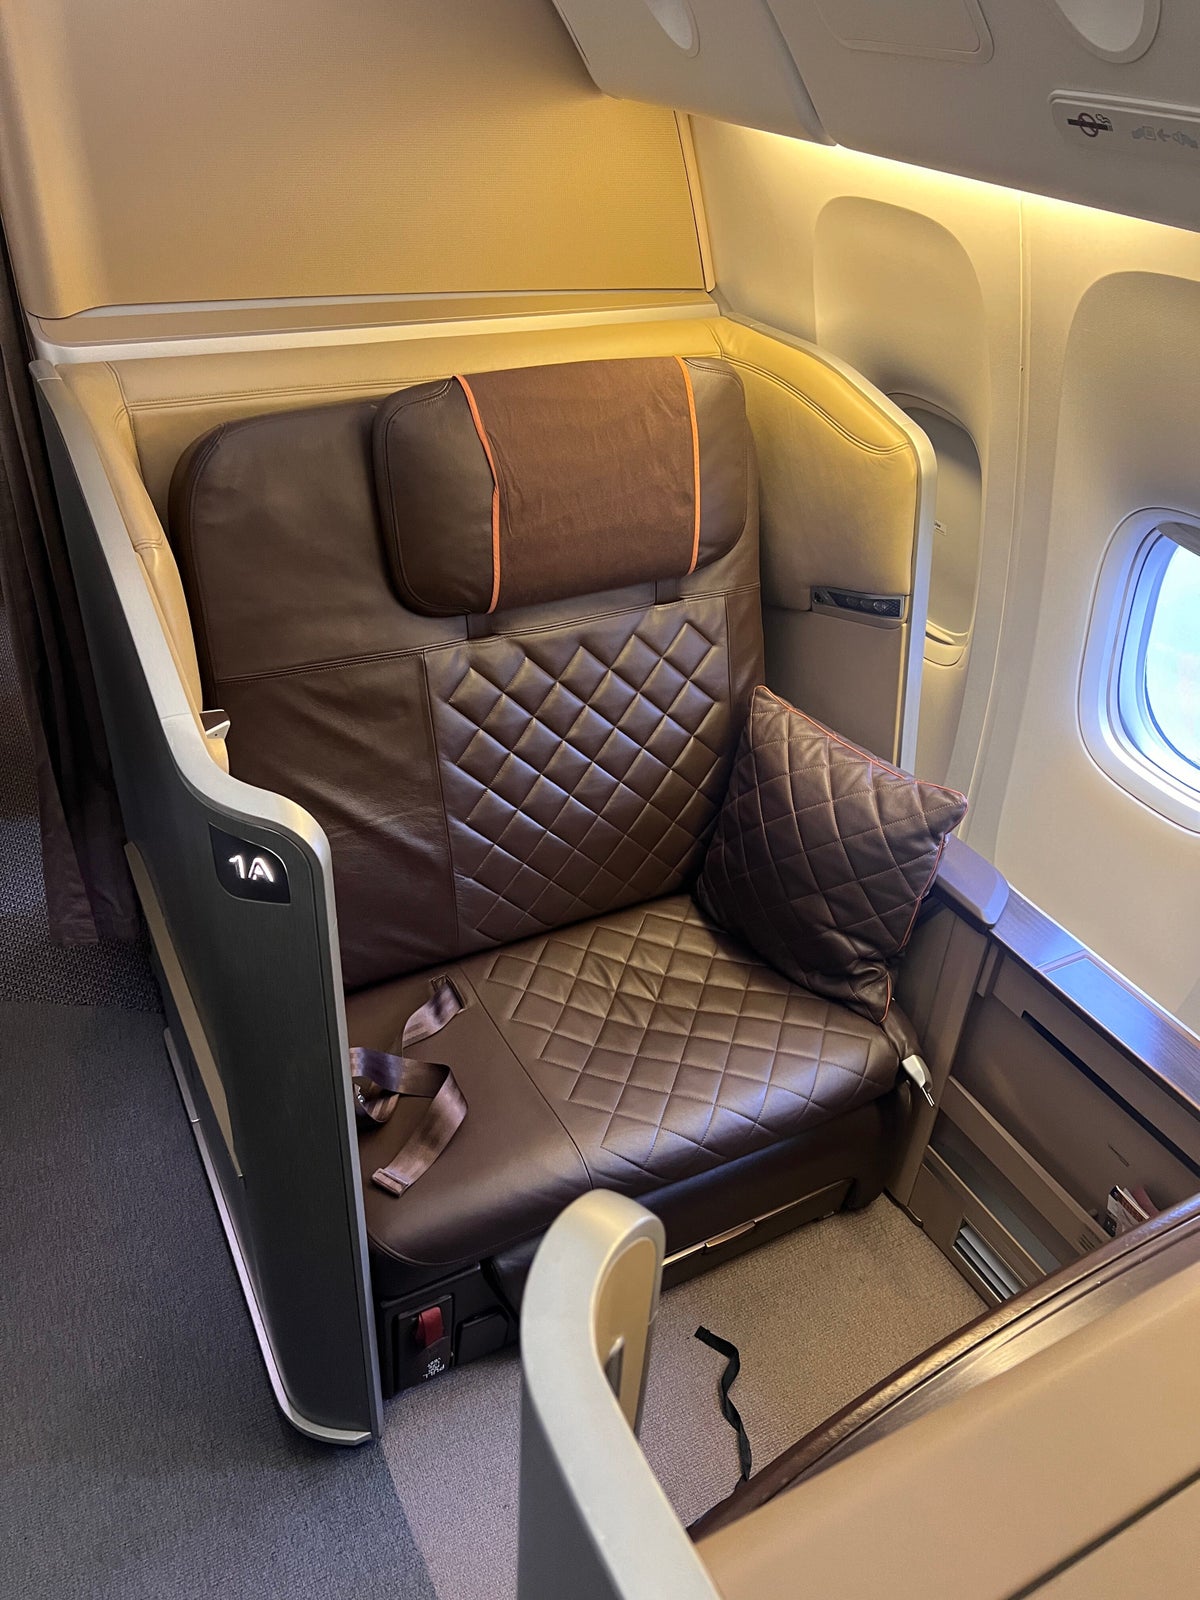 Singapore 777 first class seat 1A